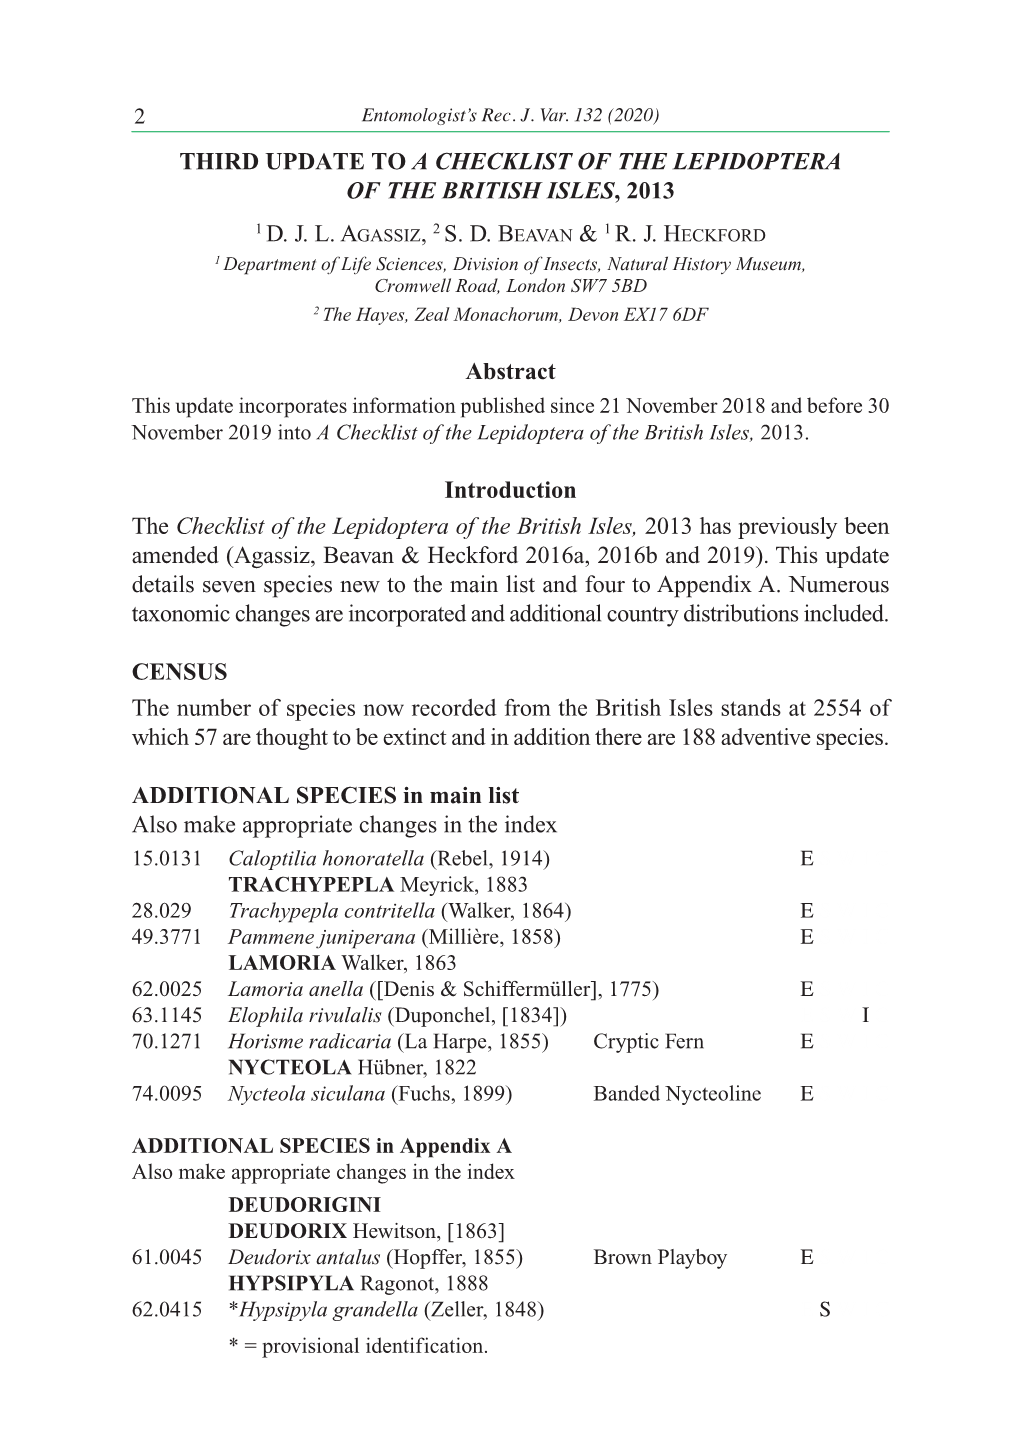 Third Update to a Checklist of the Lepidoptera of the British Isles , 2013